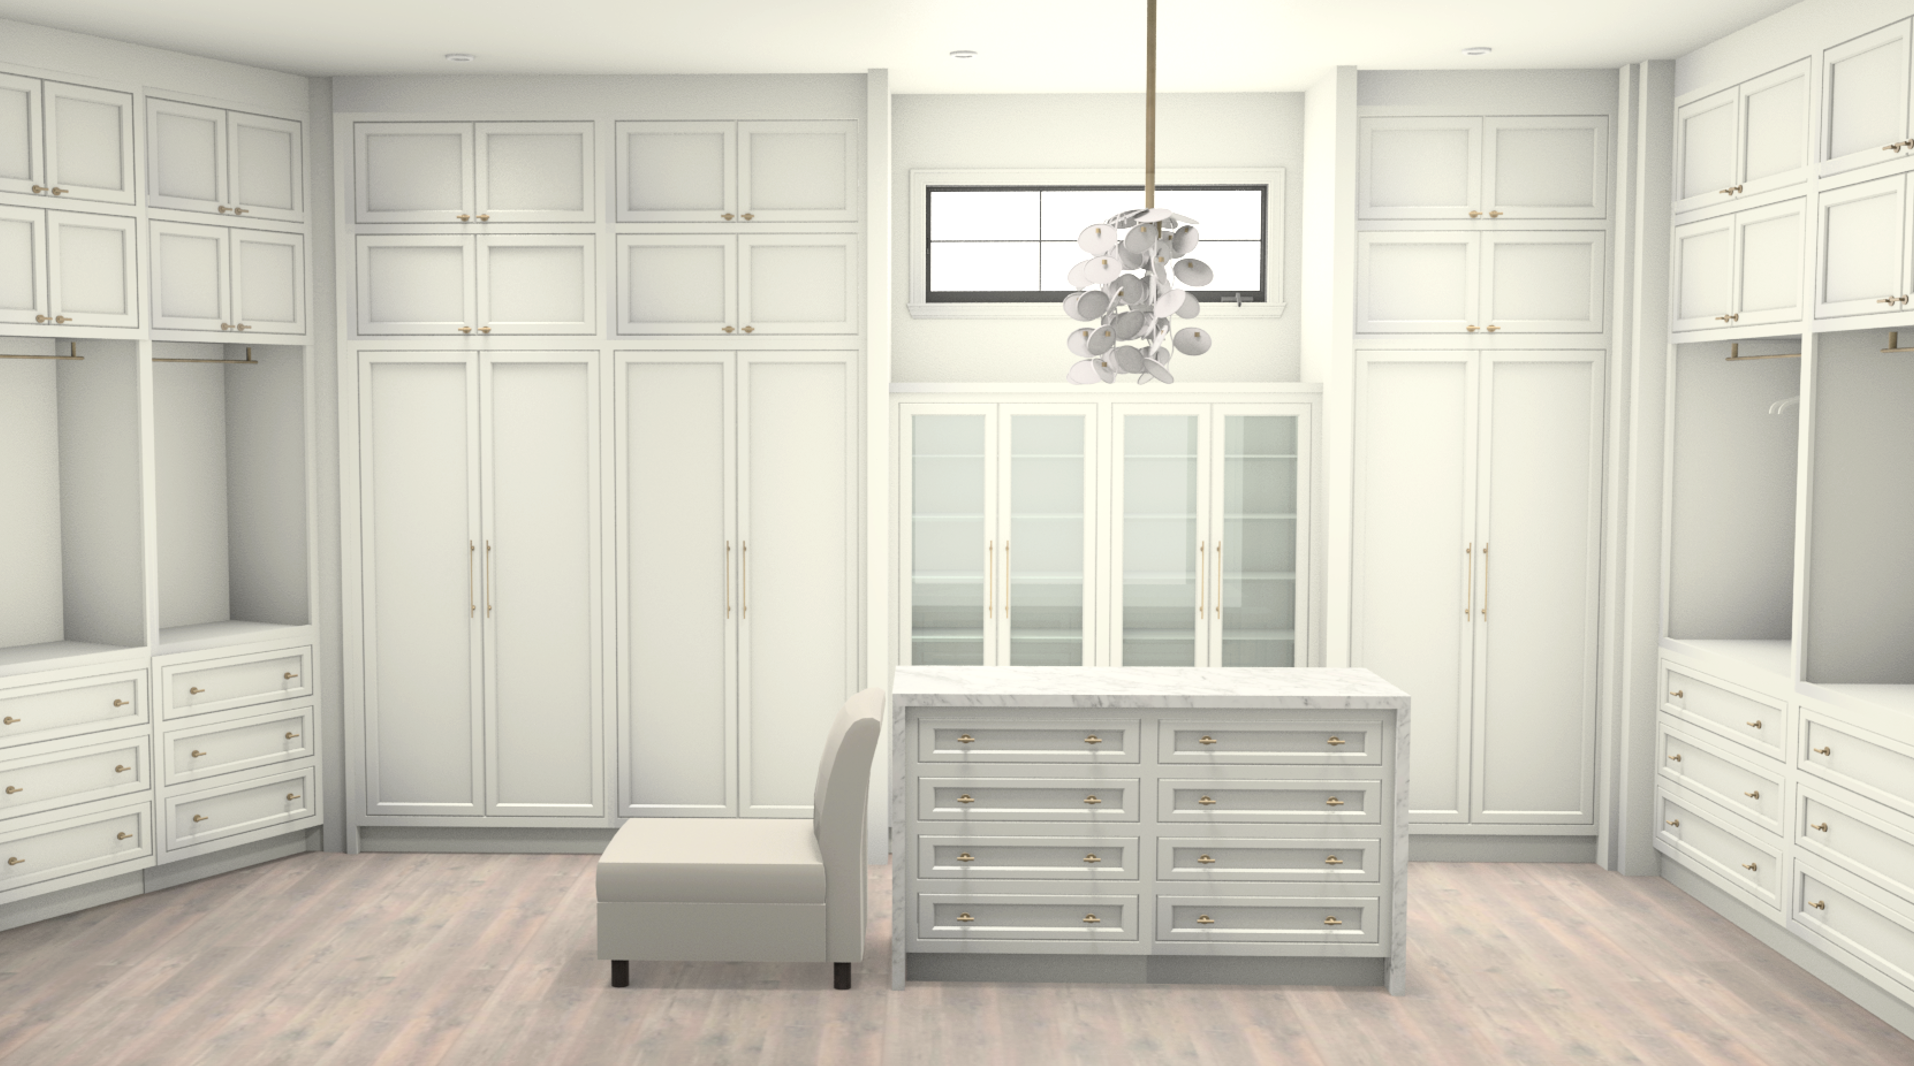 3D rendering of large custom principal dressing room with white cabinets and gold hardware